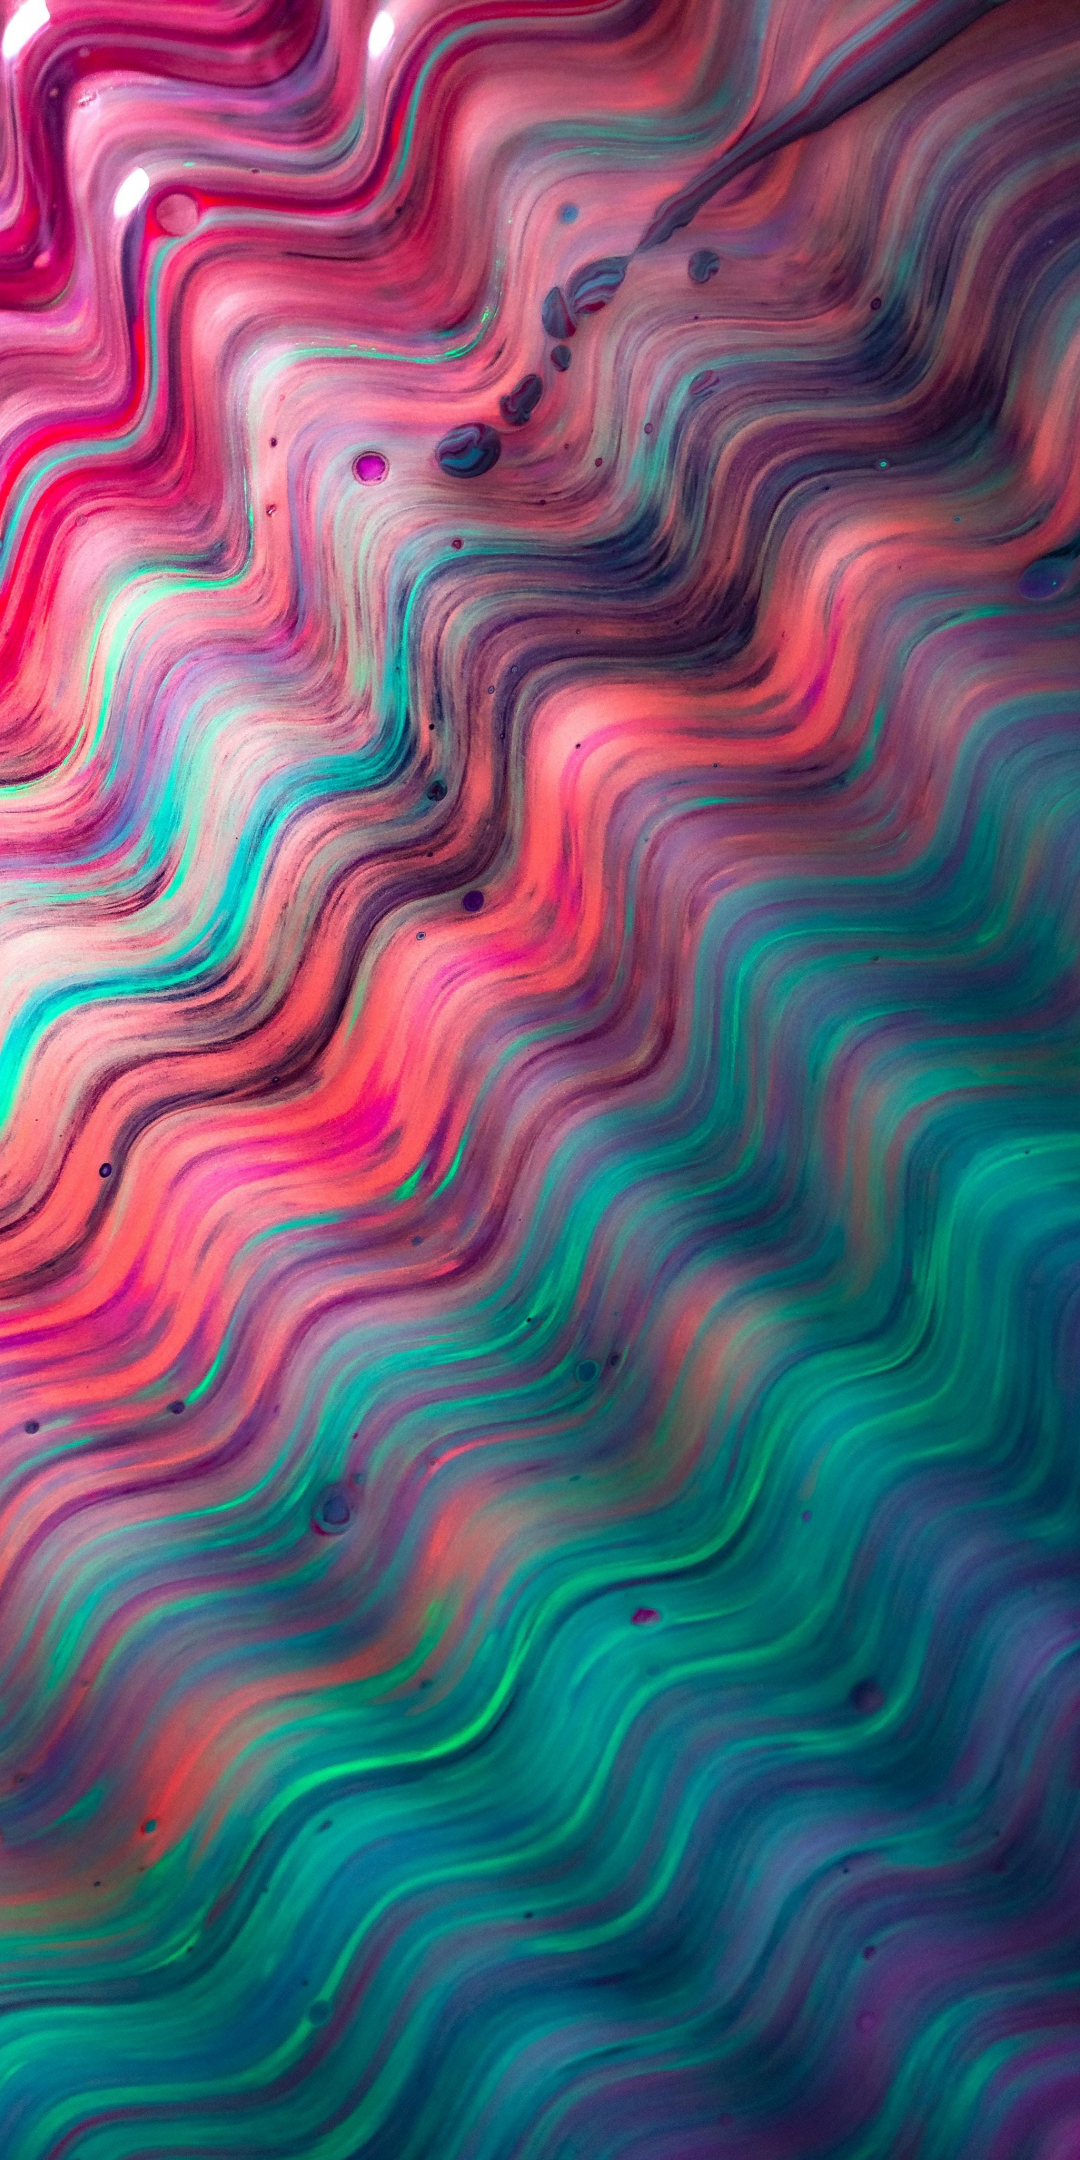 Ripple effect, colorful, abstract art, 1080x2160 wallpaper